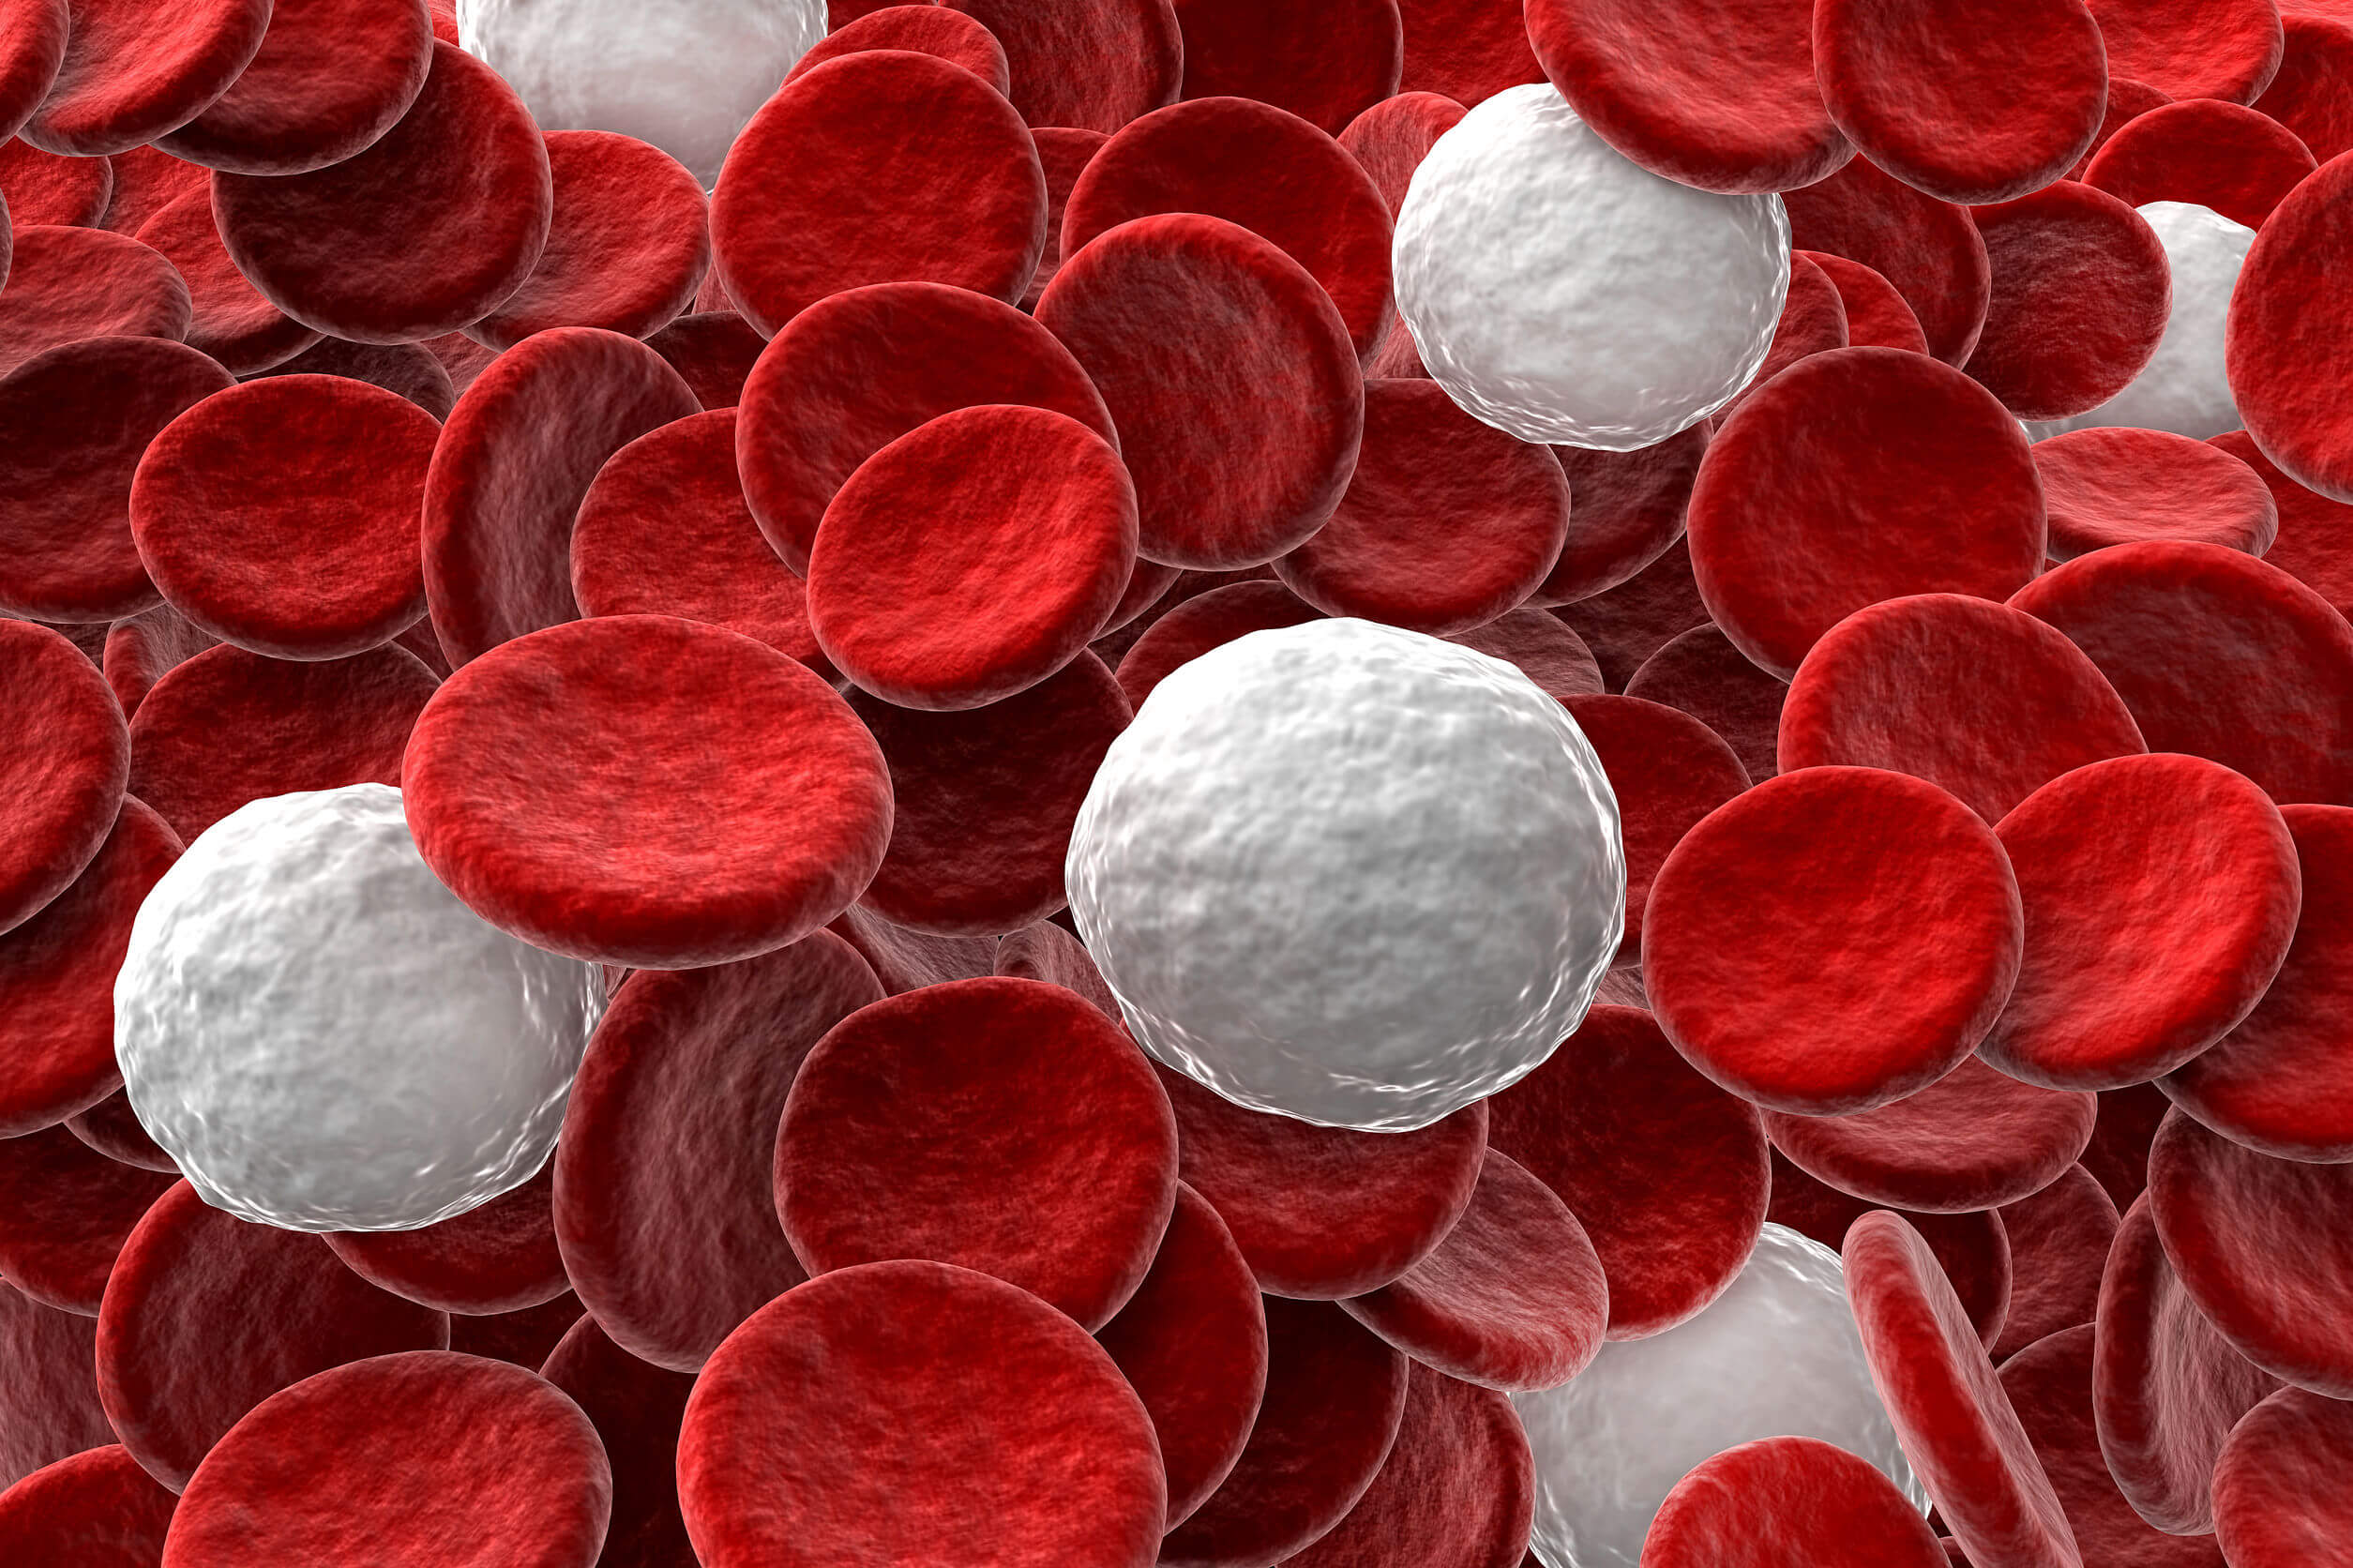 The highest number of Natural Killer cells are found in the blood.